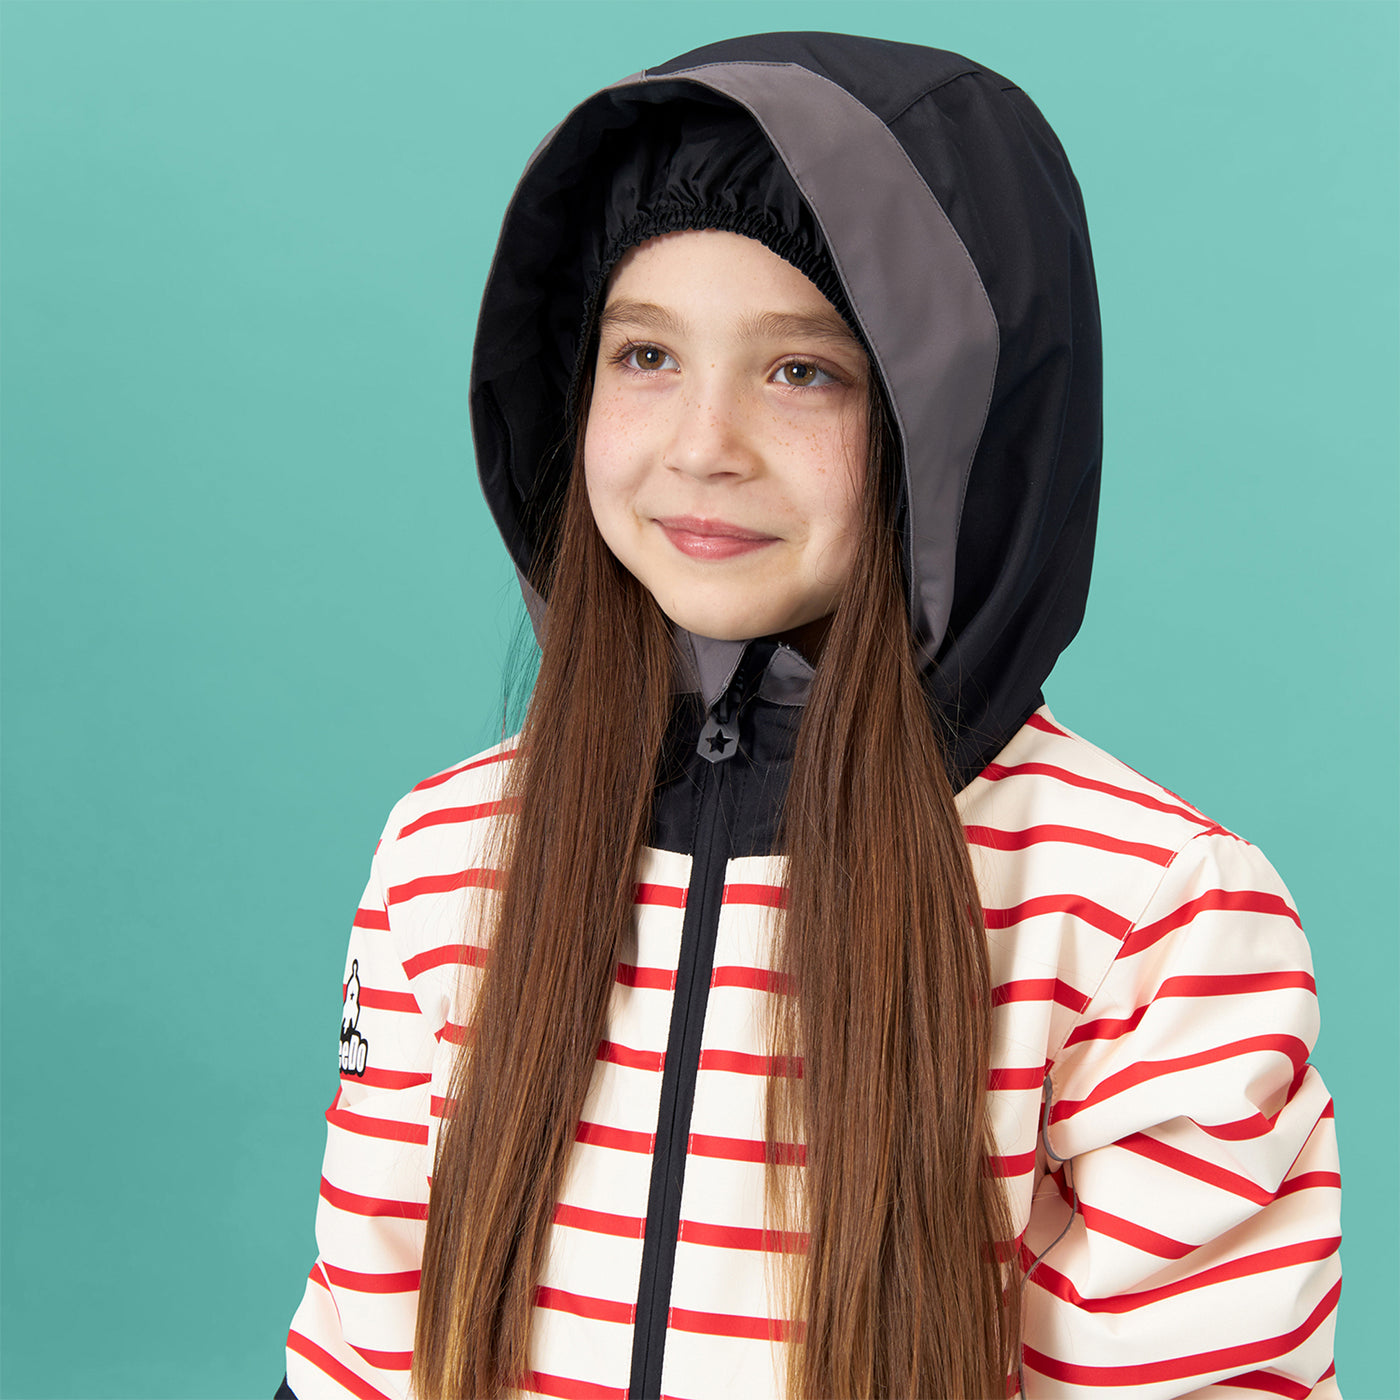 Weedo Kids Cosmo Pirate Snow Jacket - DISCONTINUED